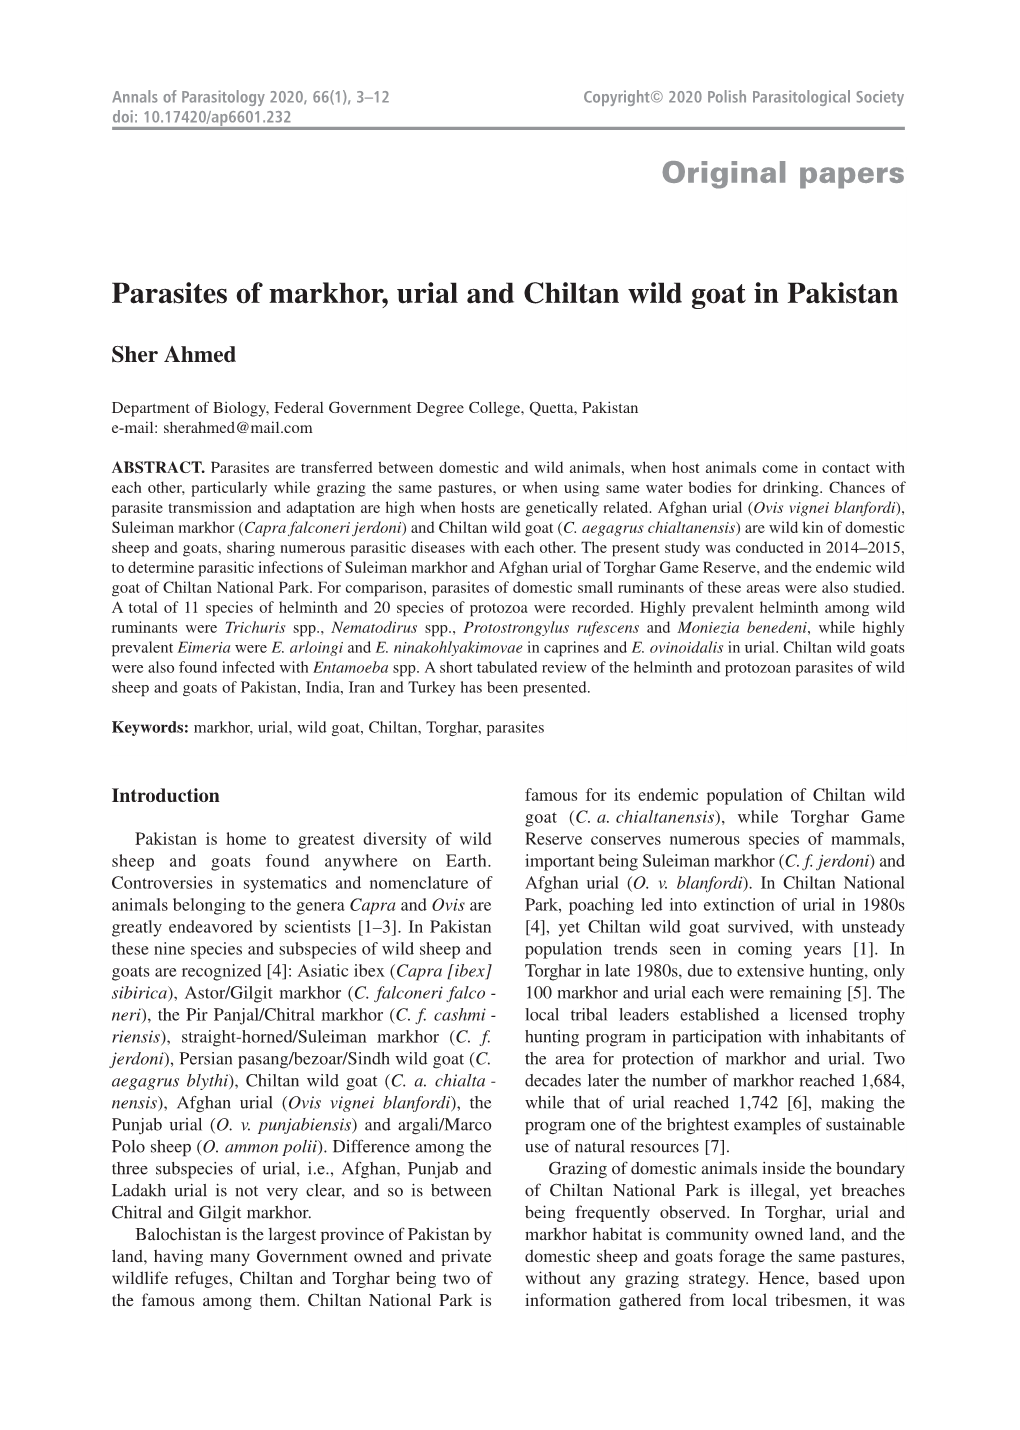 Original Papers Parasites of Markhor, Urial and Chiltan Wild Goat in Pakistan